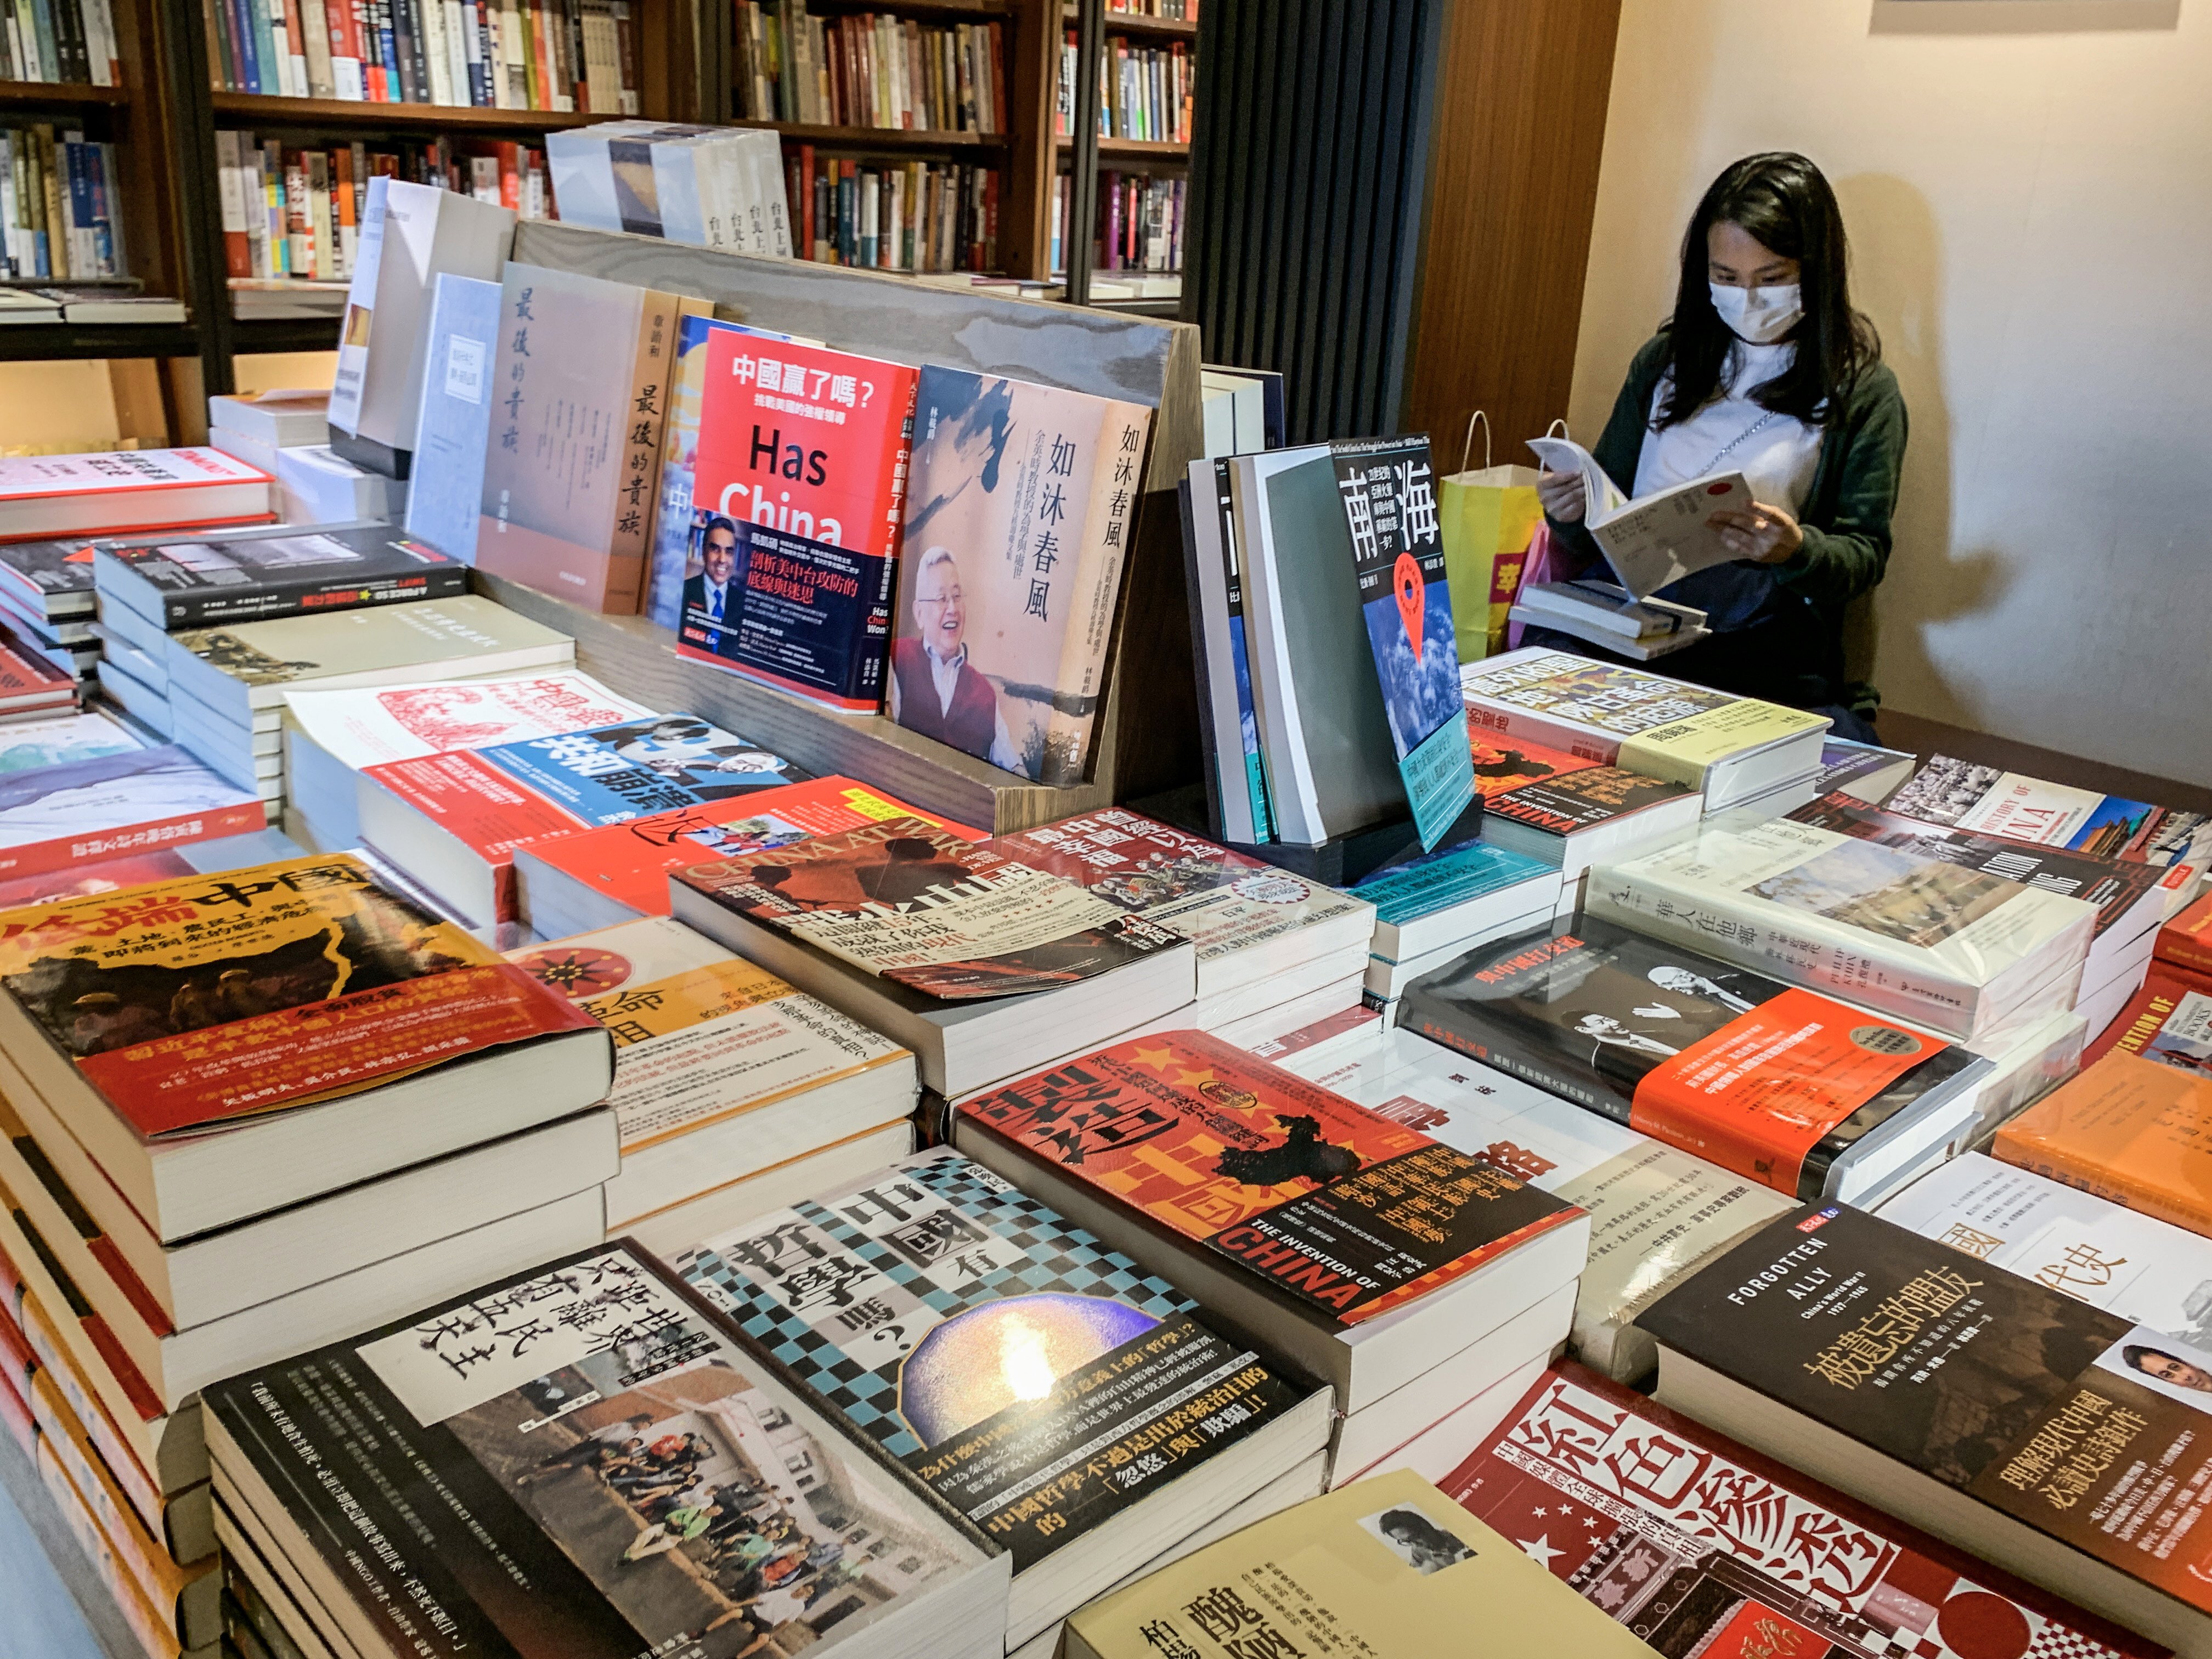 The book by Liu Qikun is sold out at Eslite stores in Hong Kong, according to employees of the retain chain. Photo: SCMP/Nora Tam